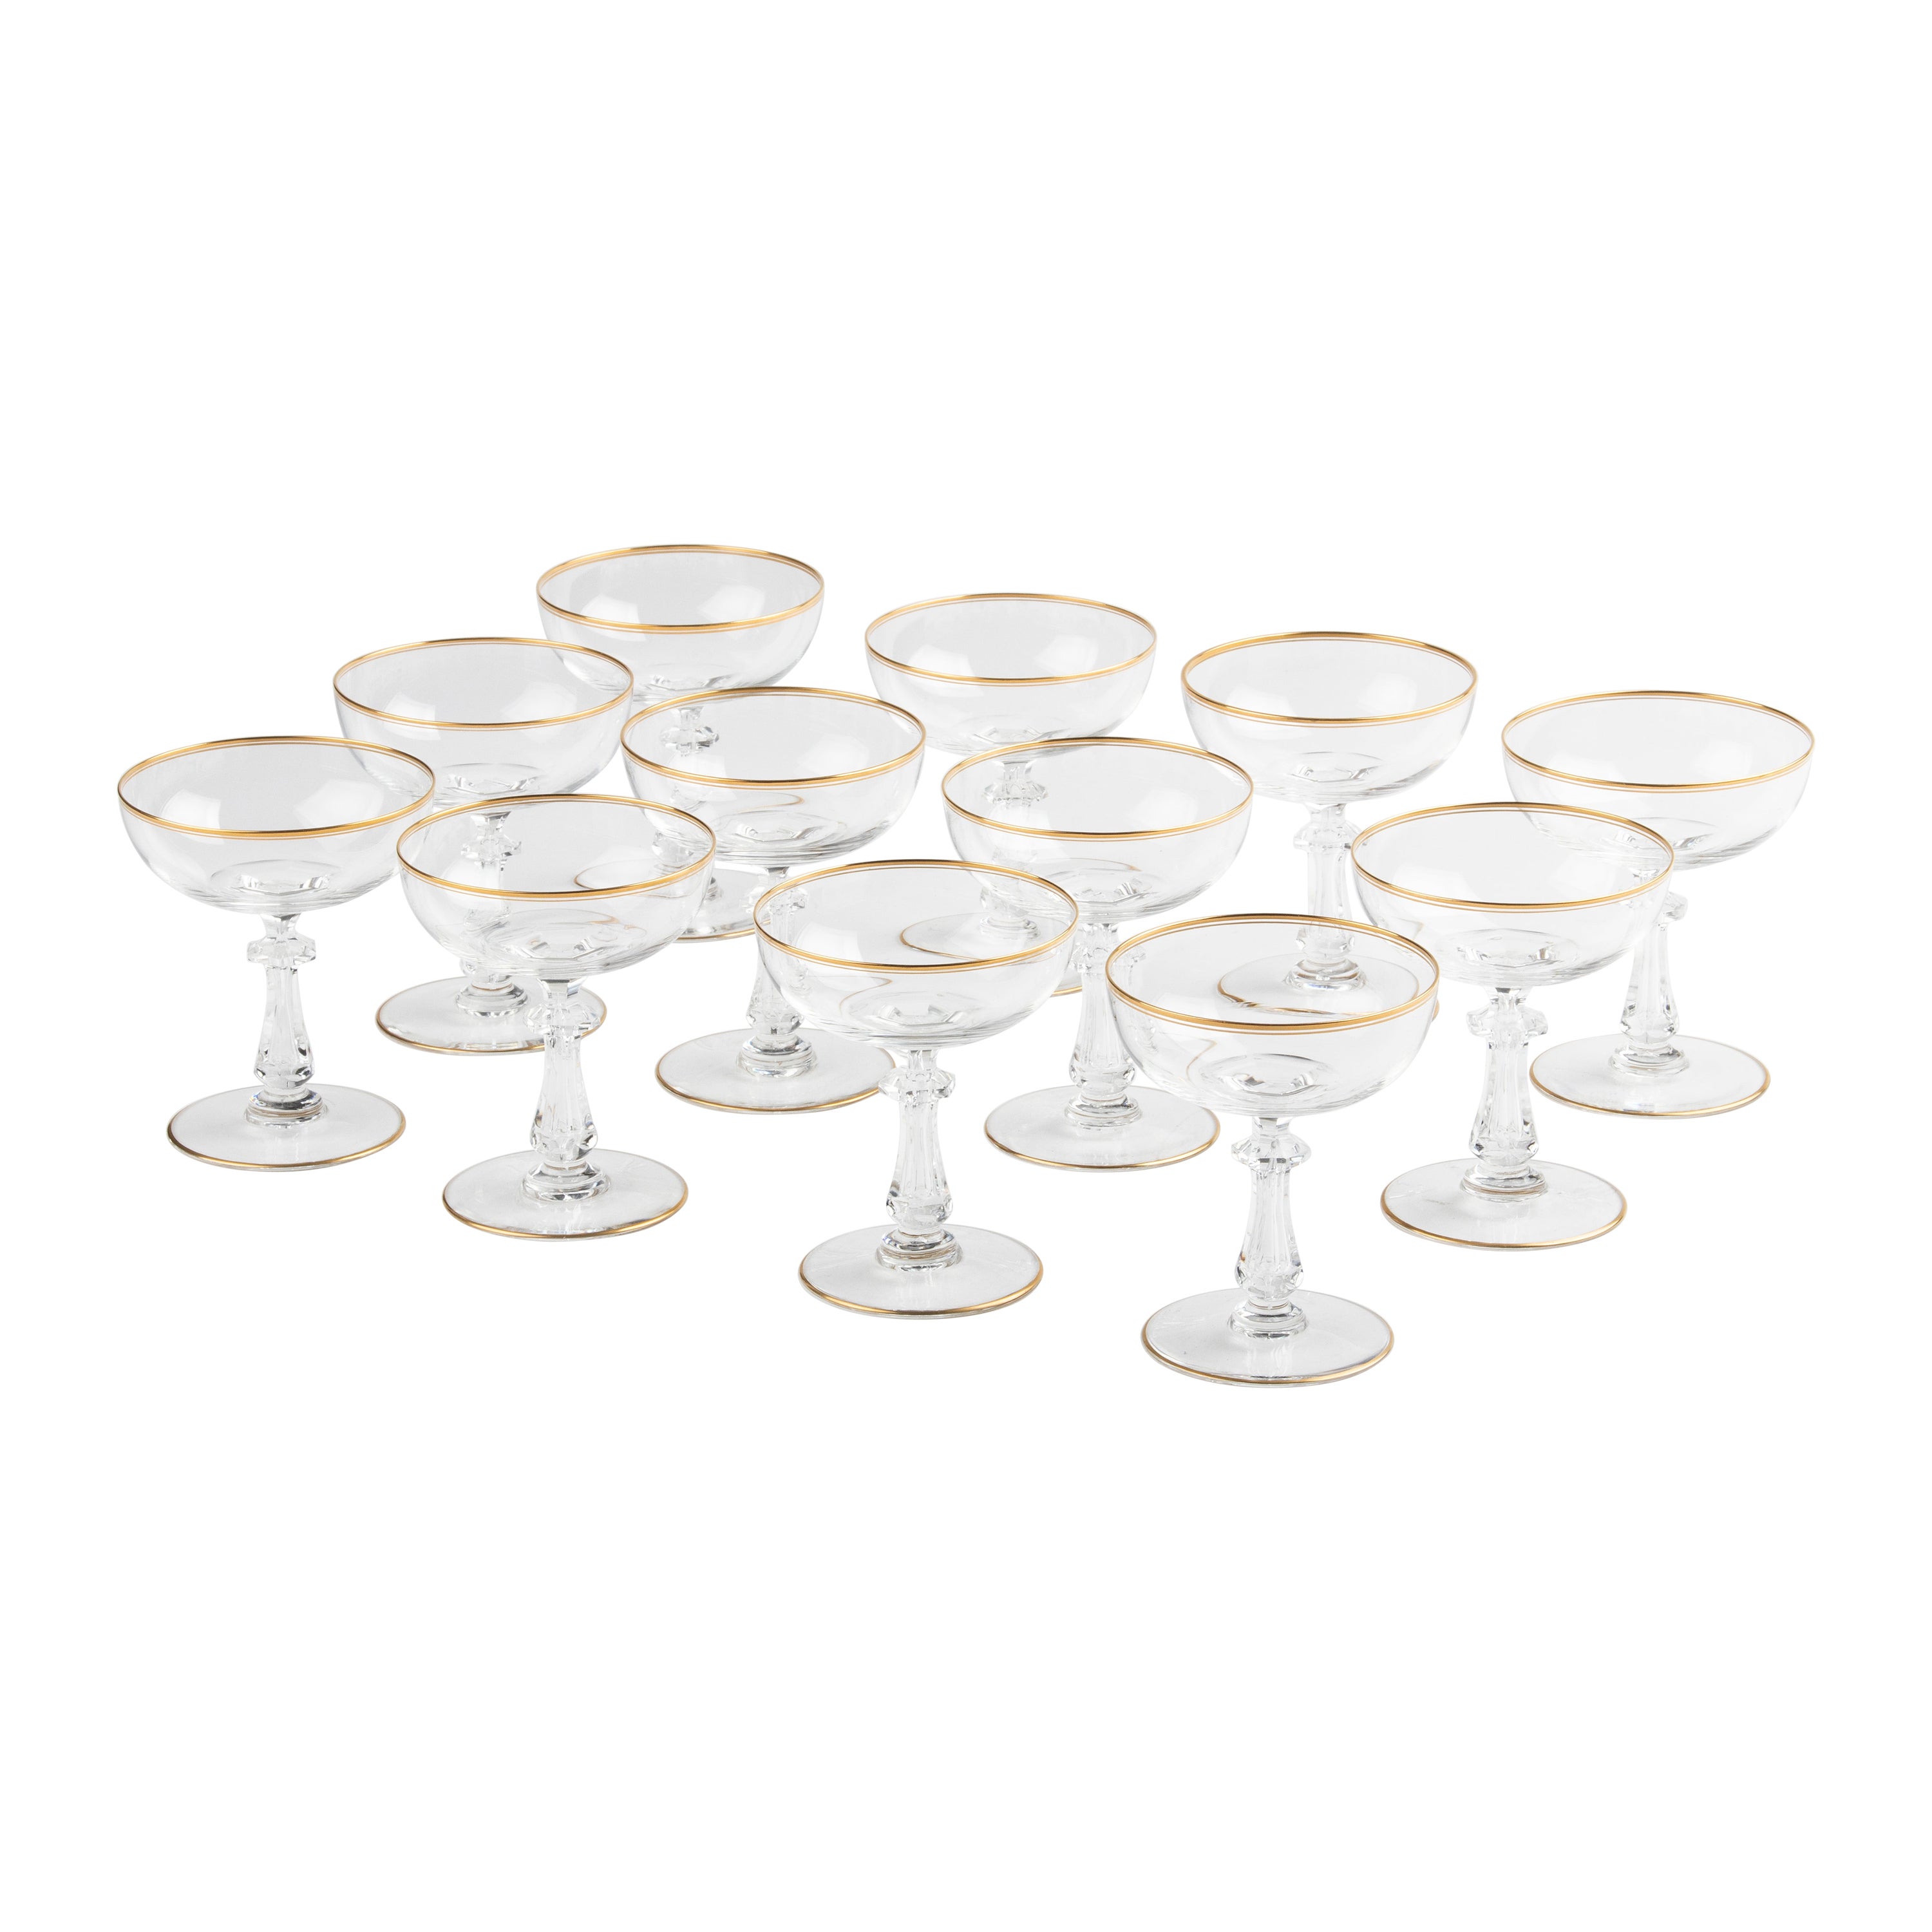 Set of 12 Early 20th Century Fine Crystal Cocktail or Champagne Glasses